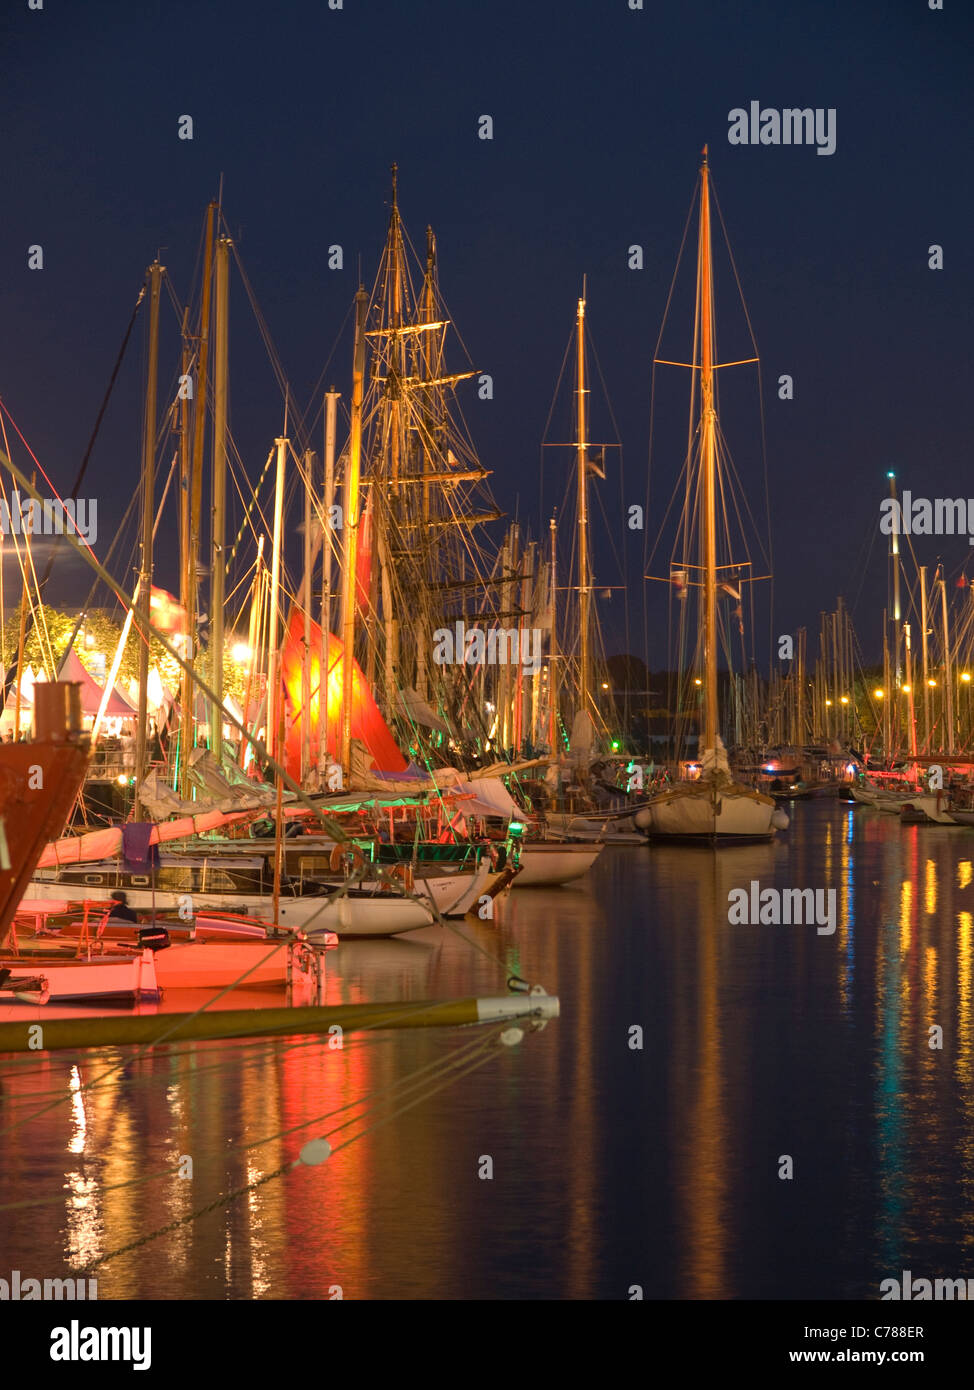 Harbour of Vannes at night, Sea week festival, Bay of Morbihan, Brittany, France, Europe. Stock Photo